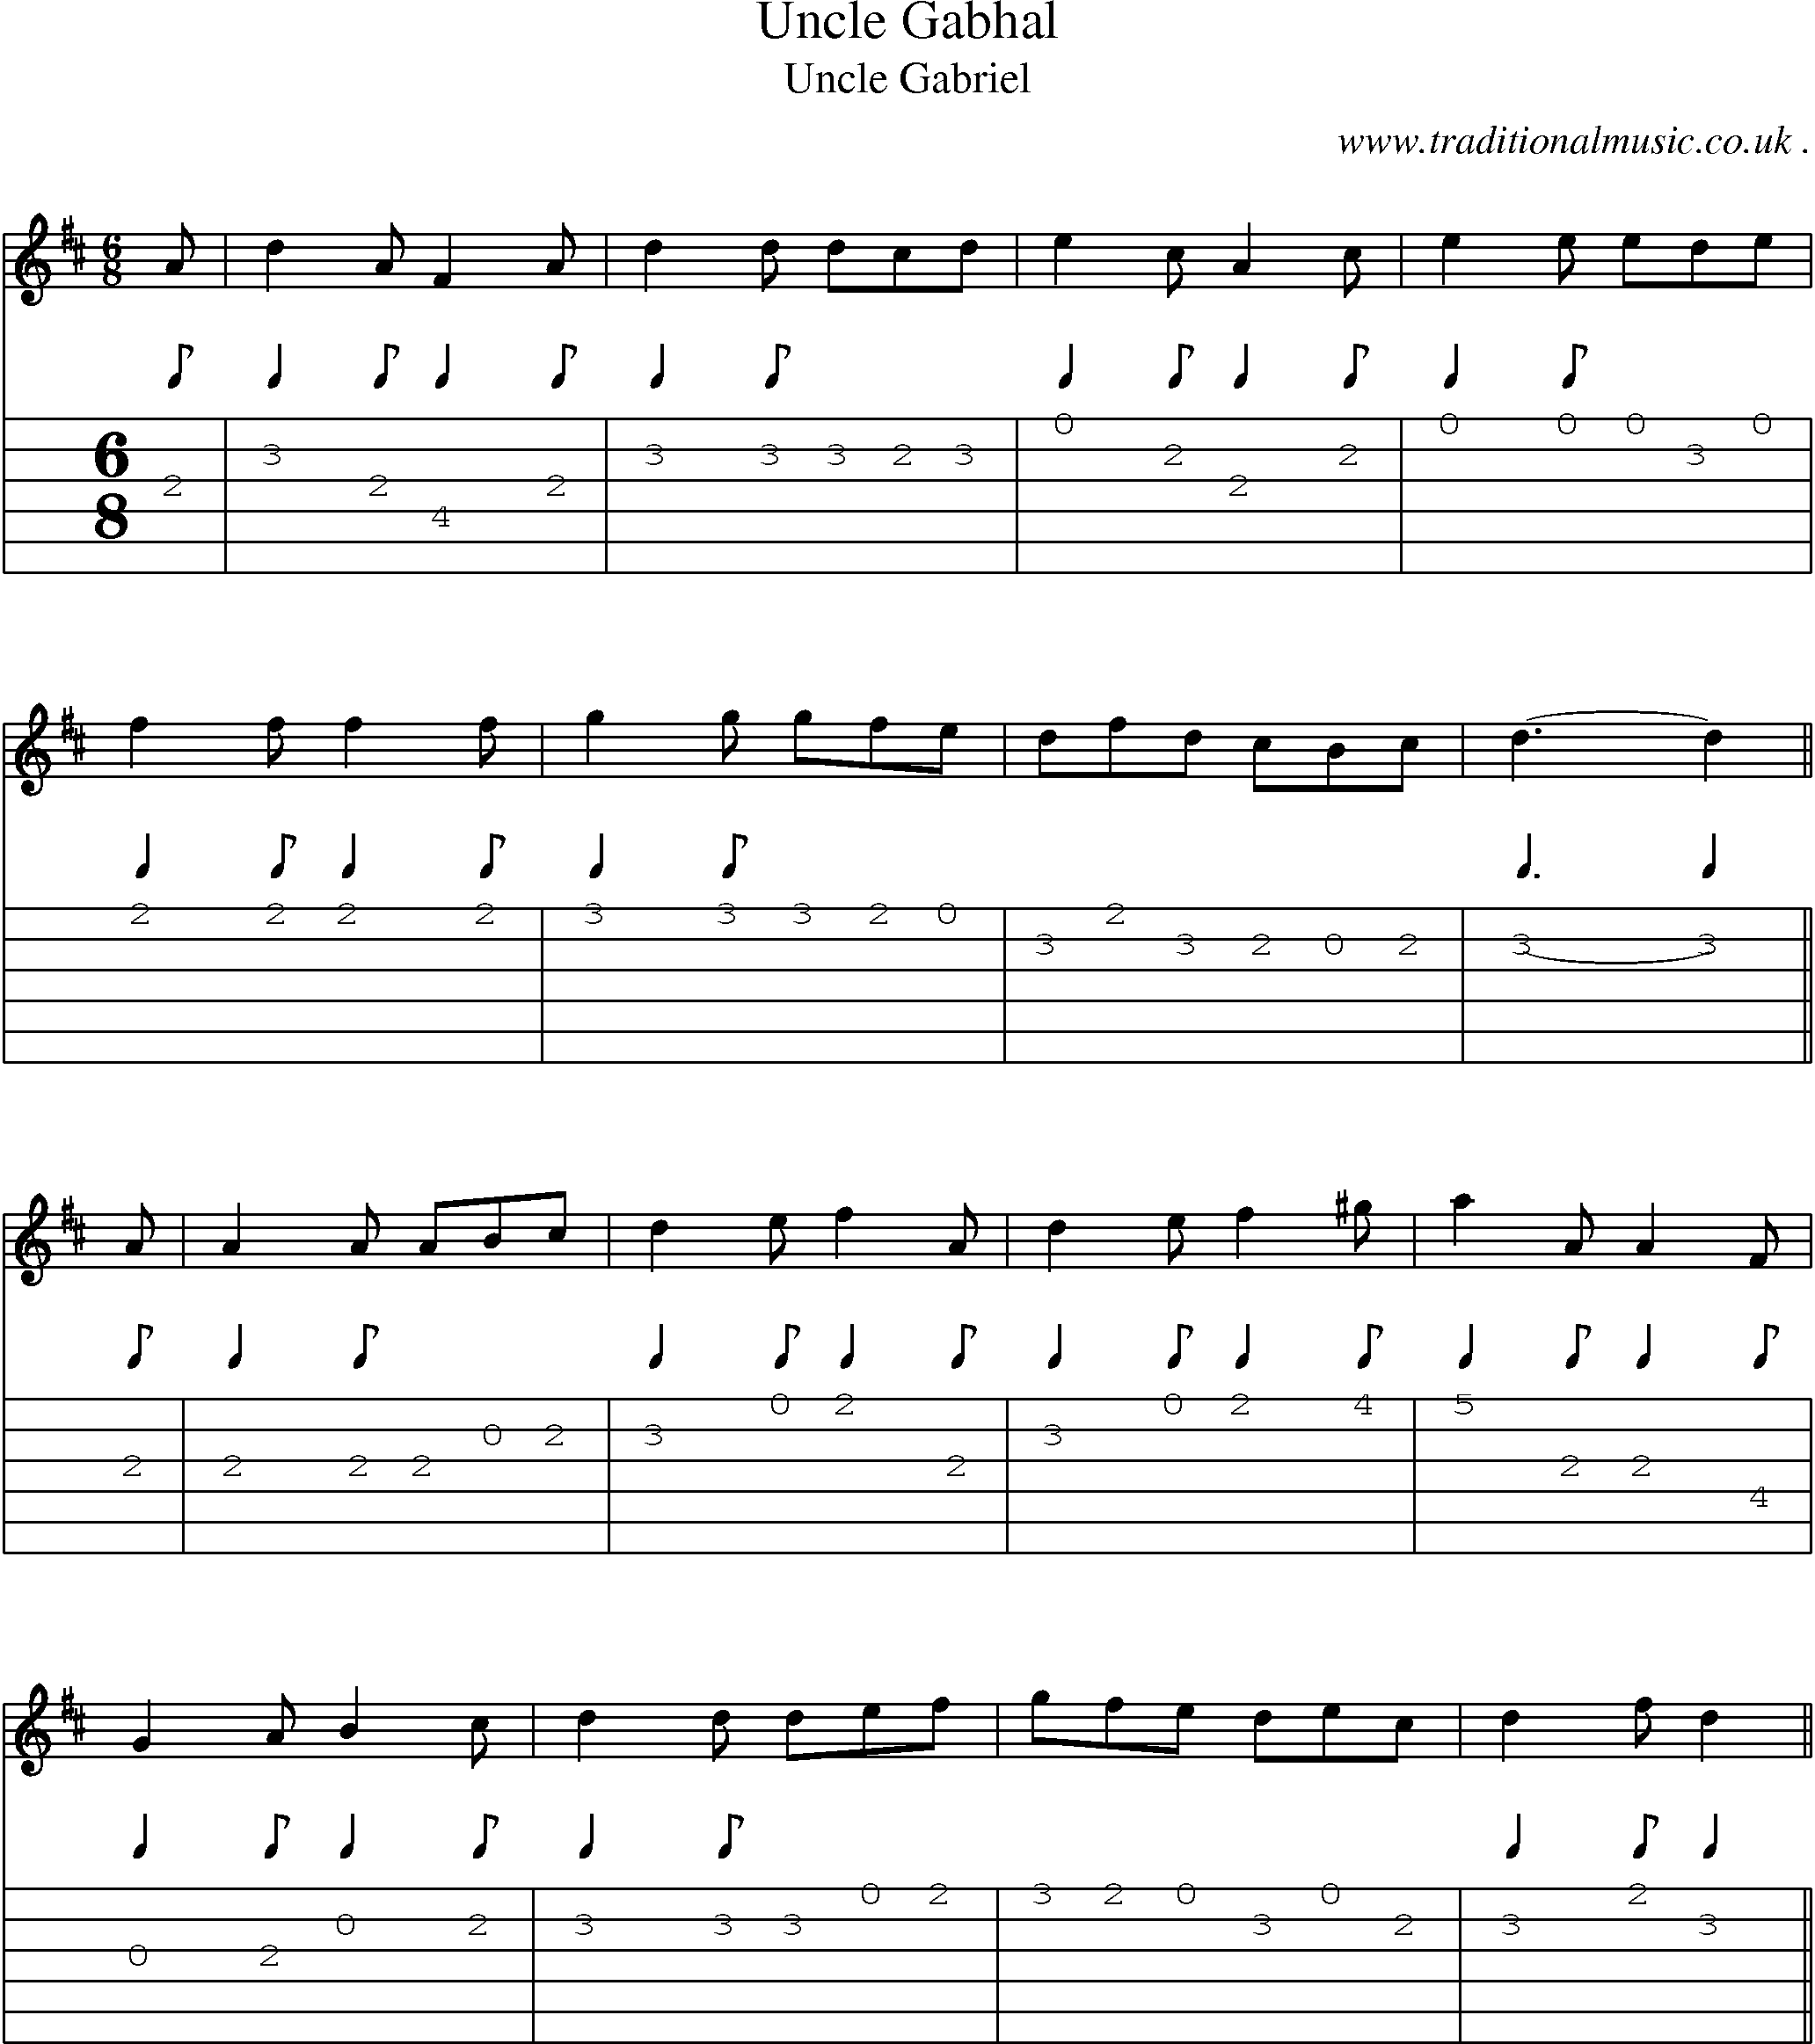 Sheet-Music and Guitar Tabs for Uncle Gabhal